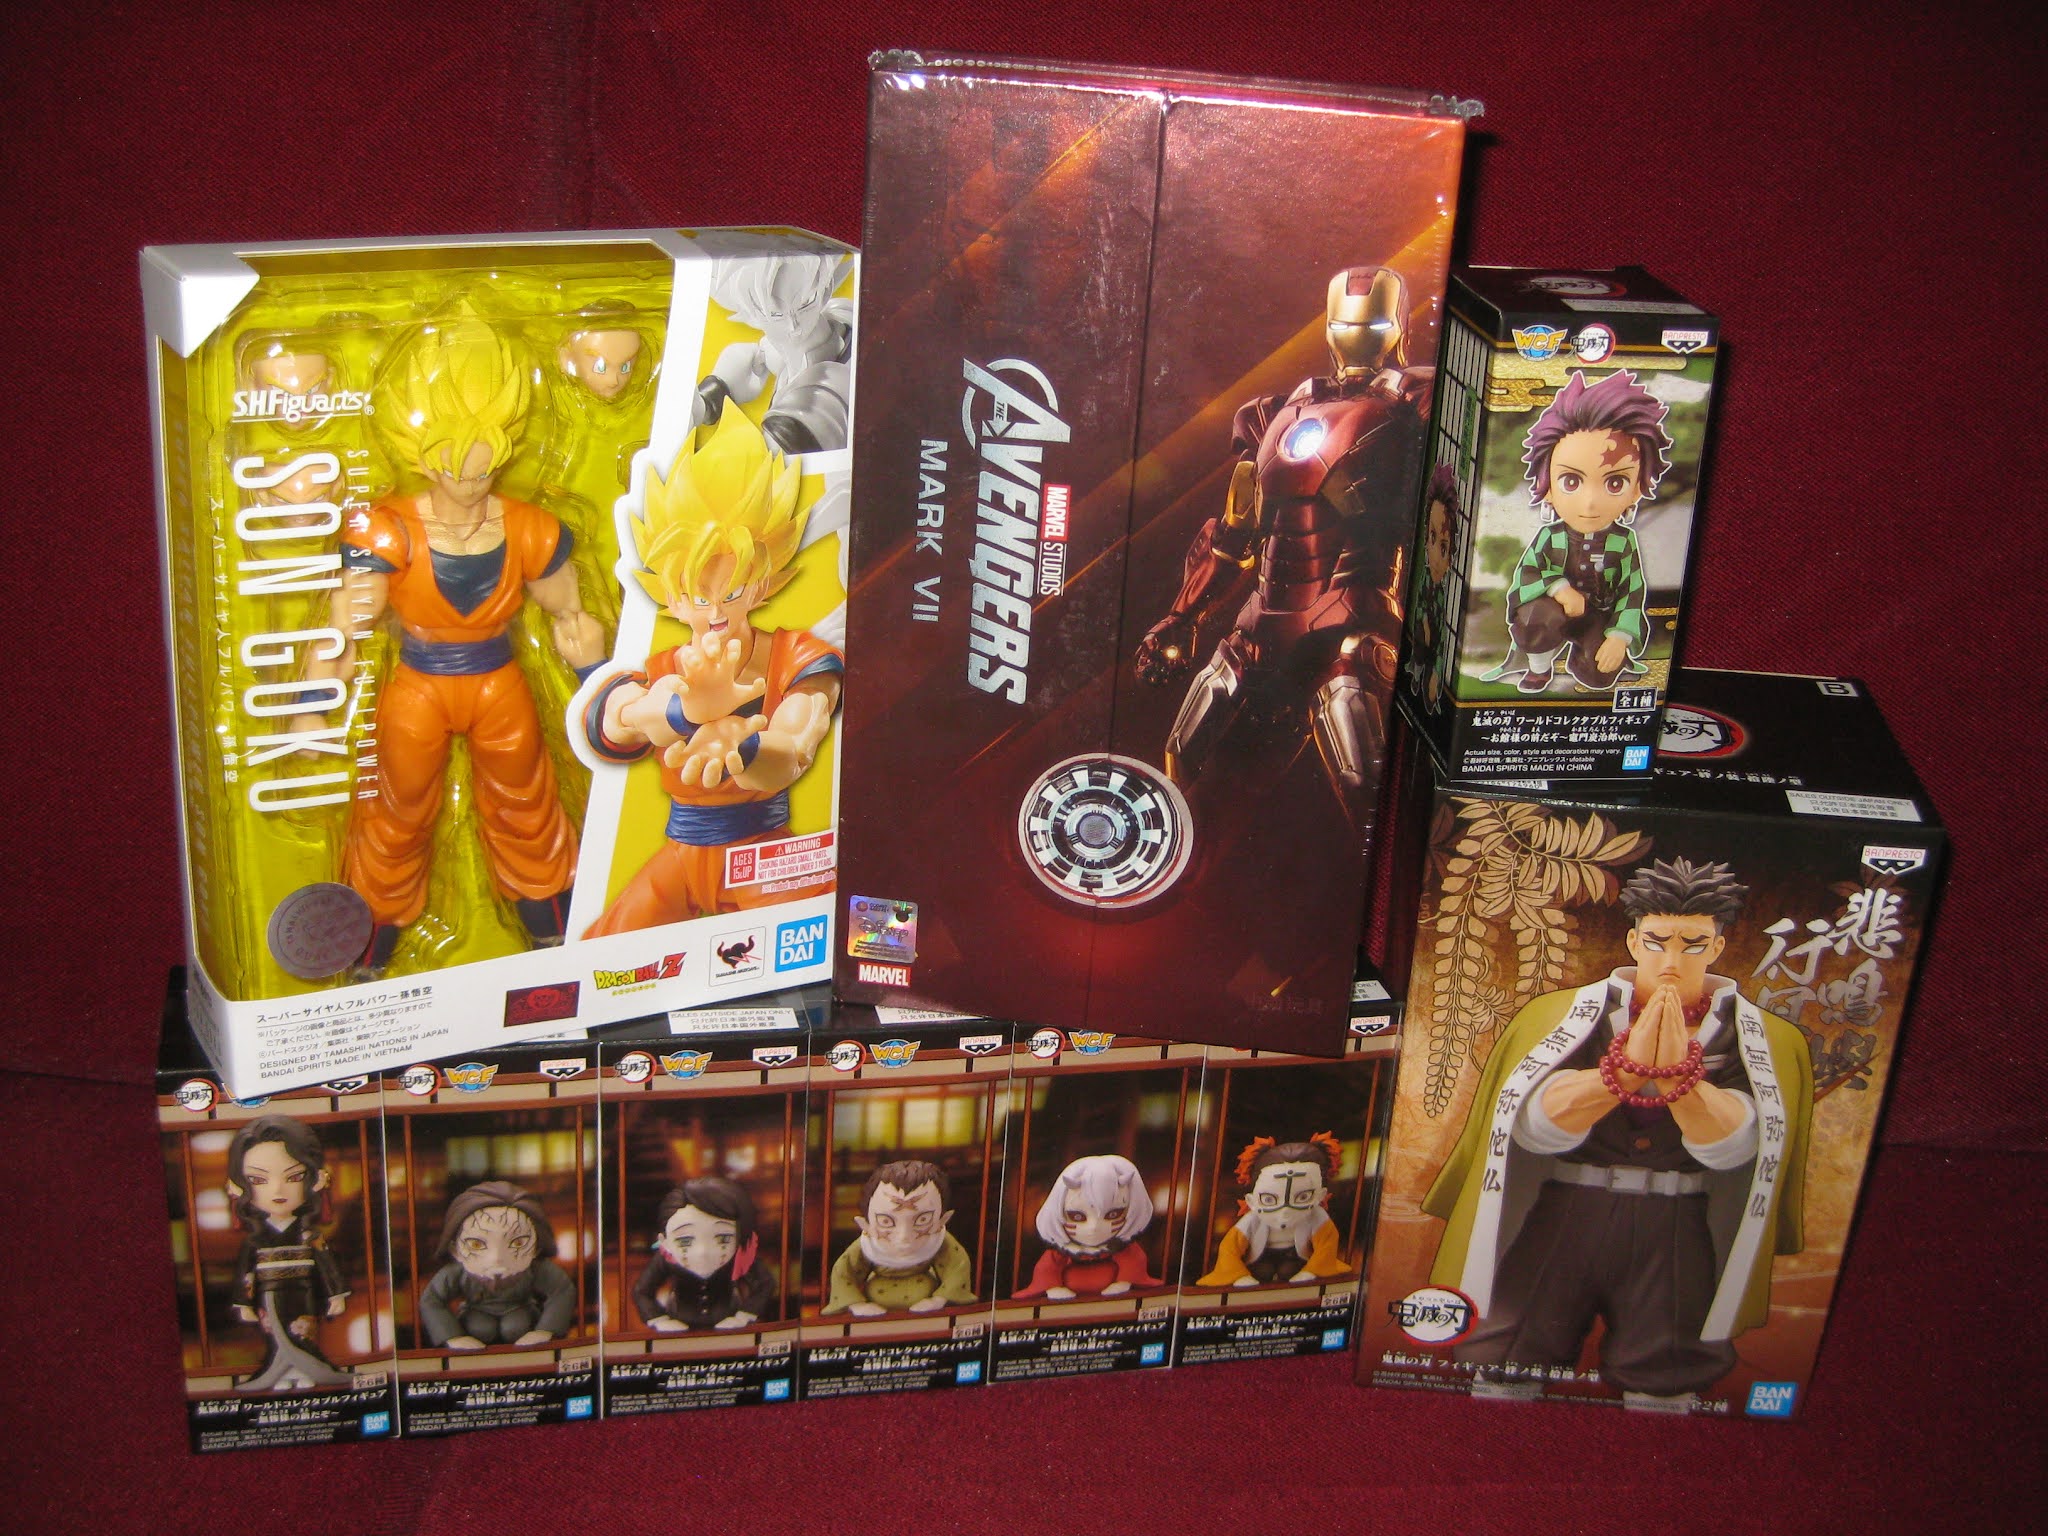 deSMOnd Collection: Mostly Japanese anime figures...